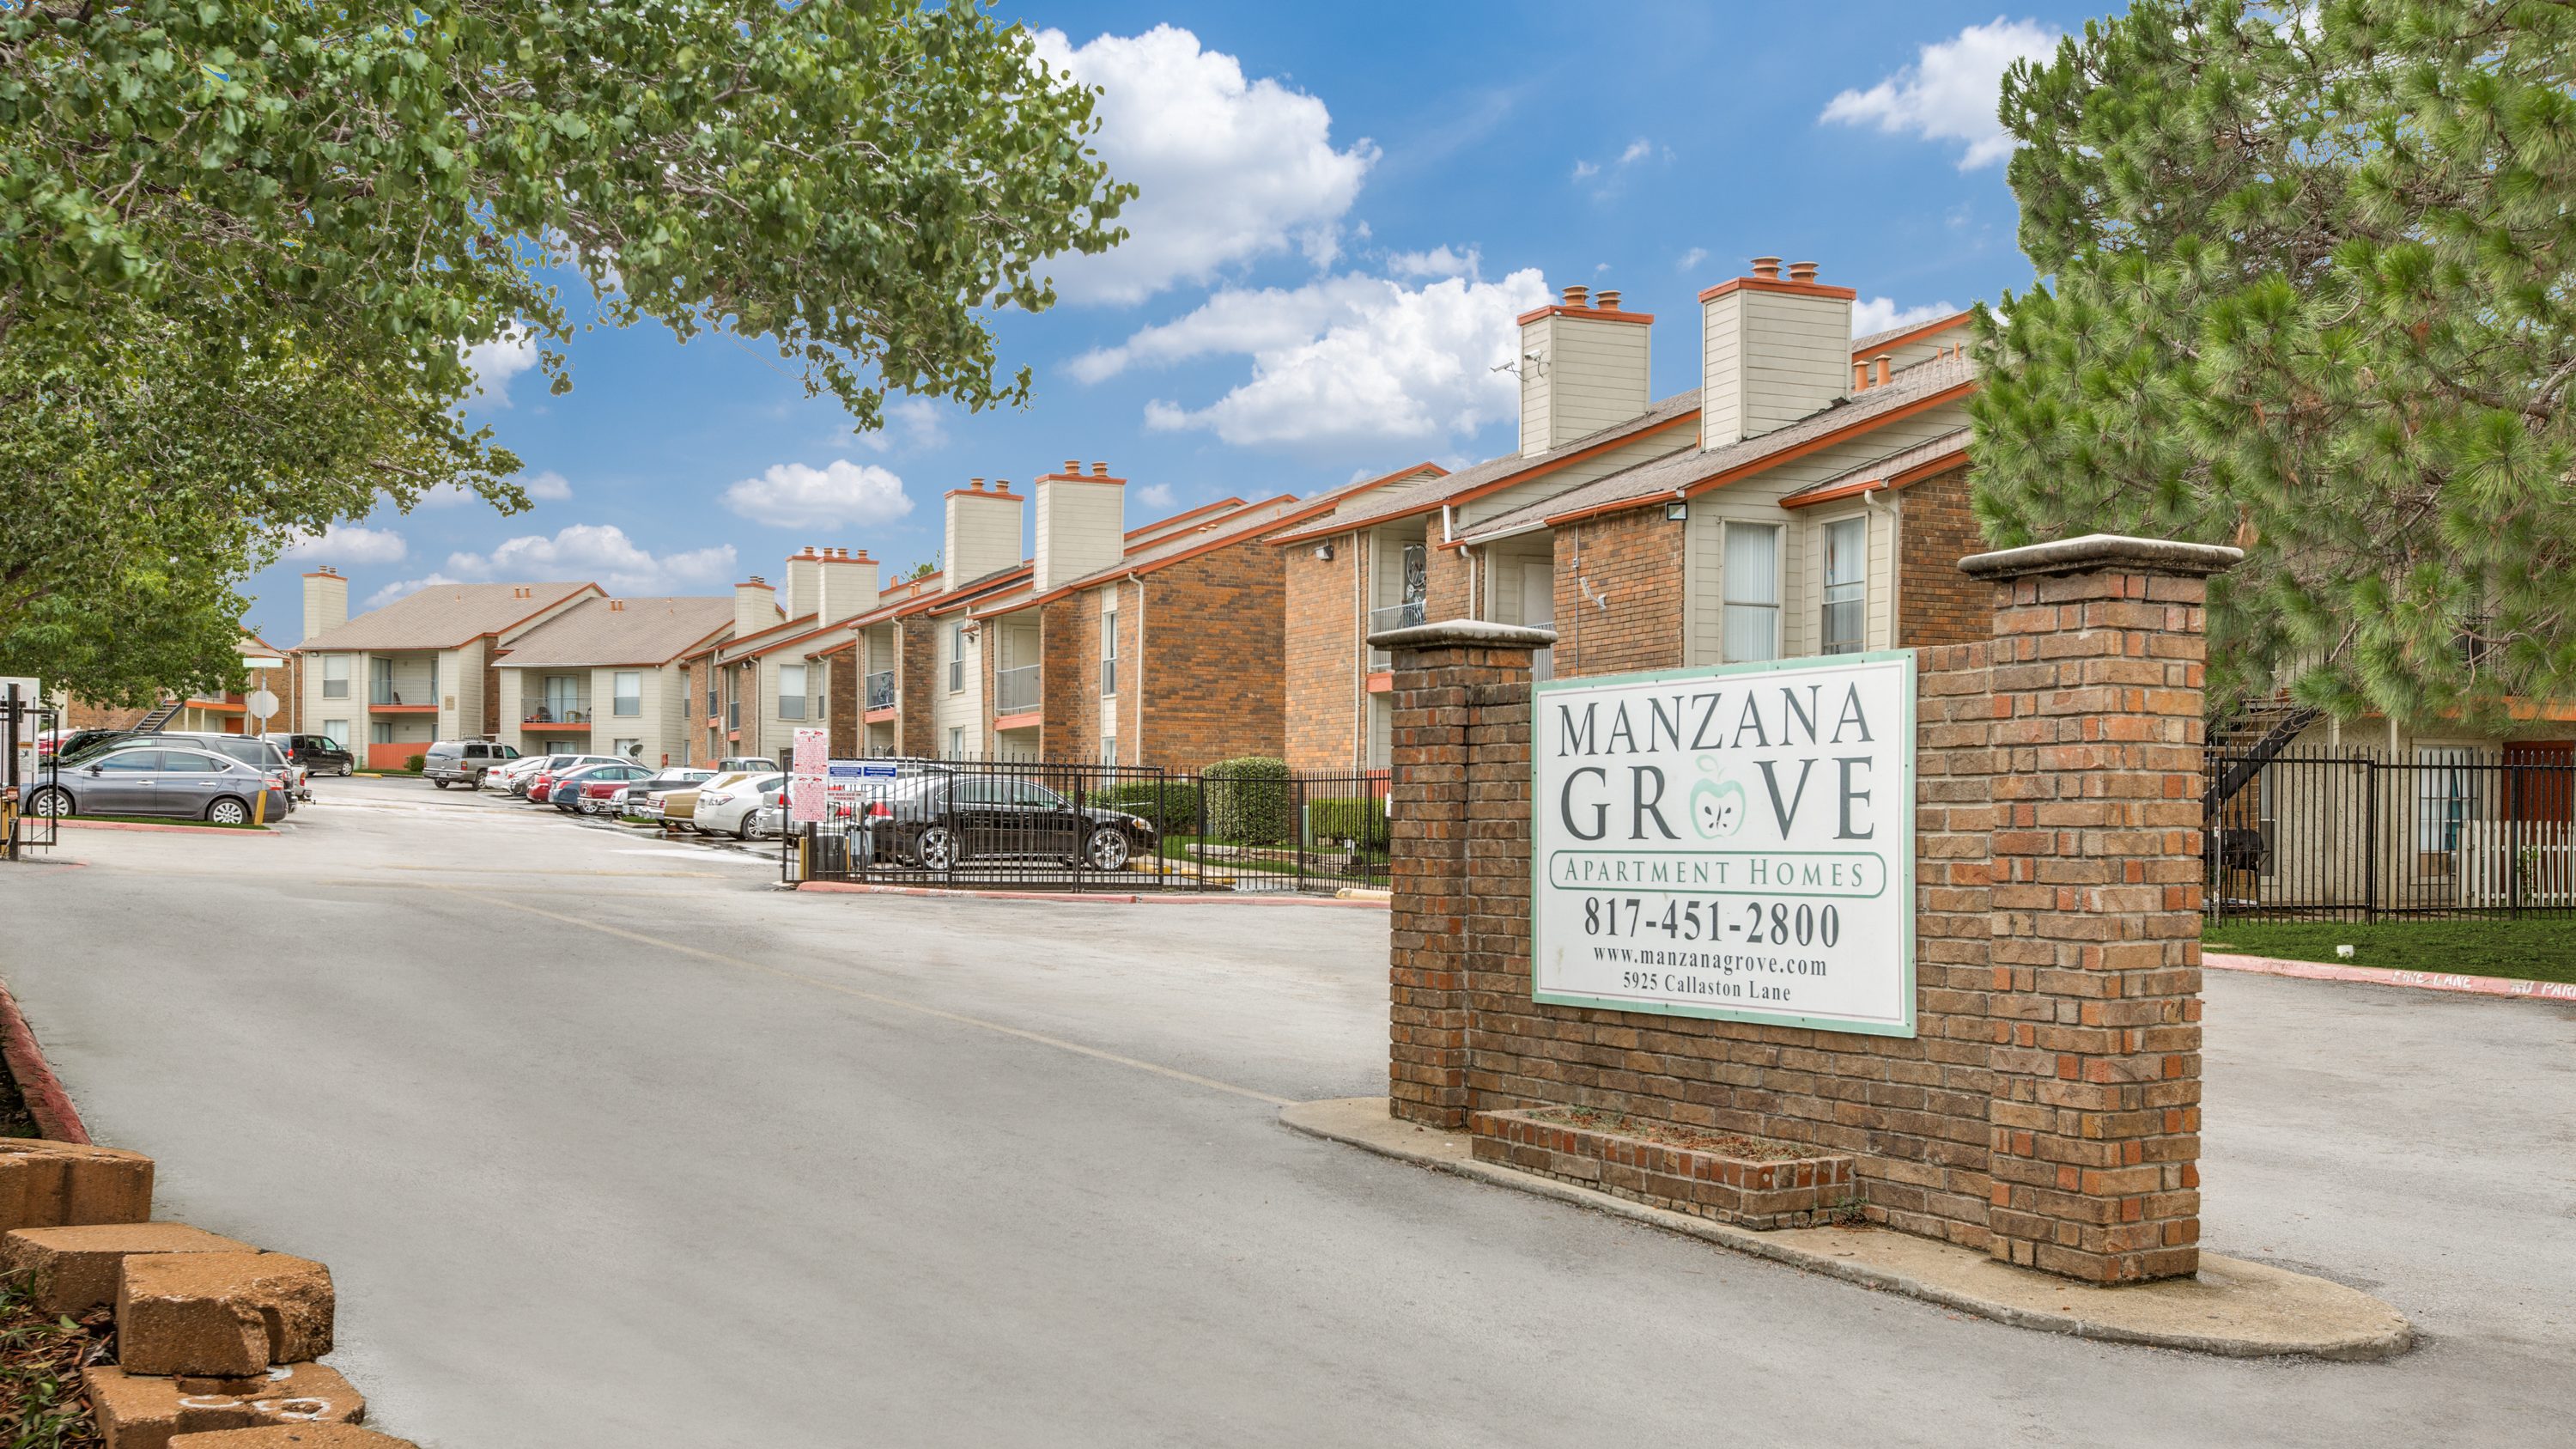 Exterior view of Manzana Grove in Fort Worth, TX featuring signage and buildings.